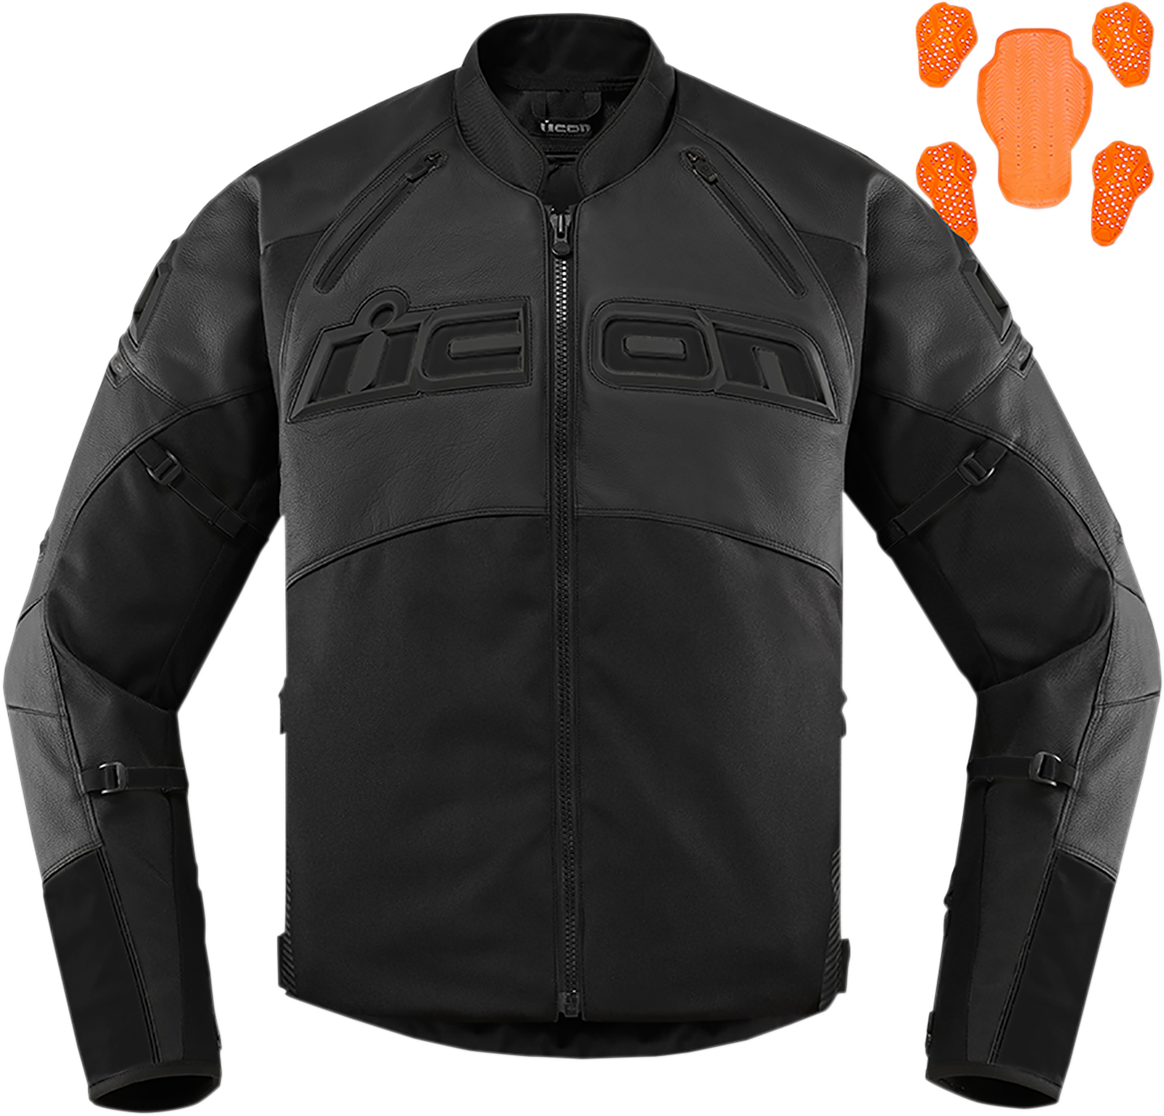 ICON Contra2™ CE Jacket - Stealth - Large 2810-3650